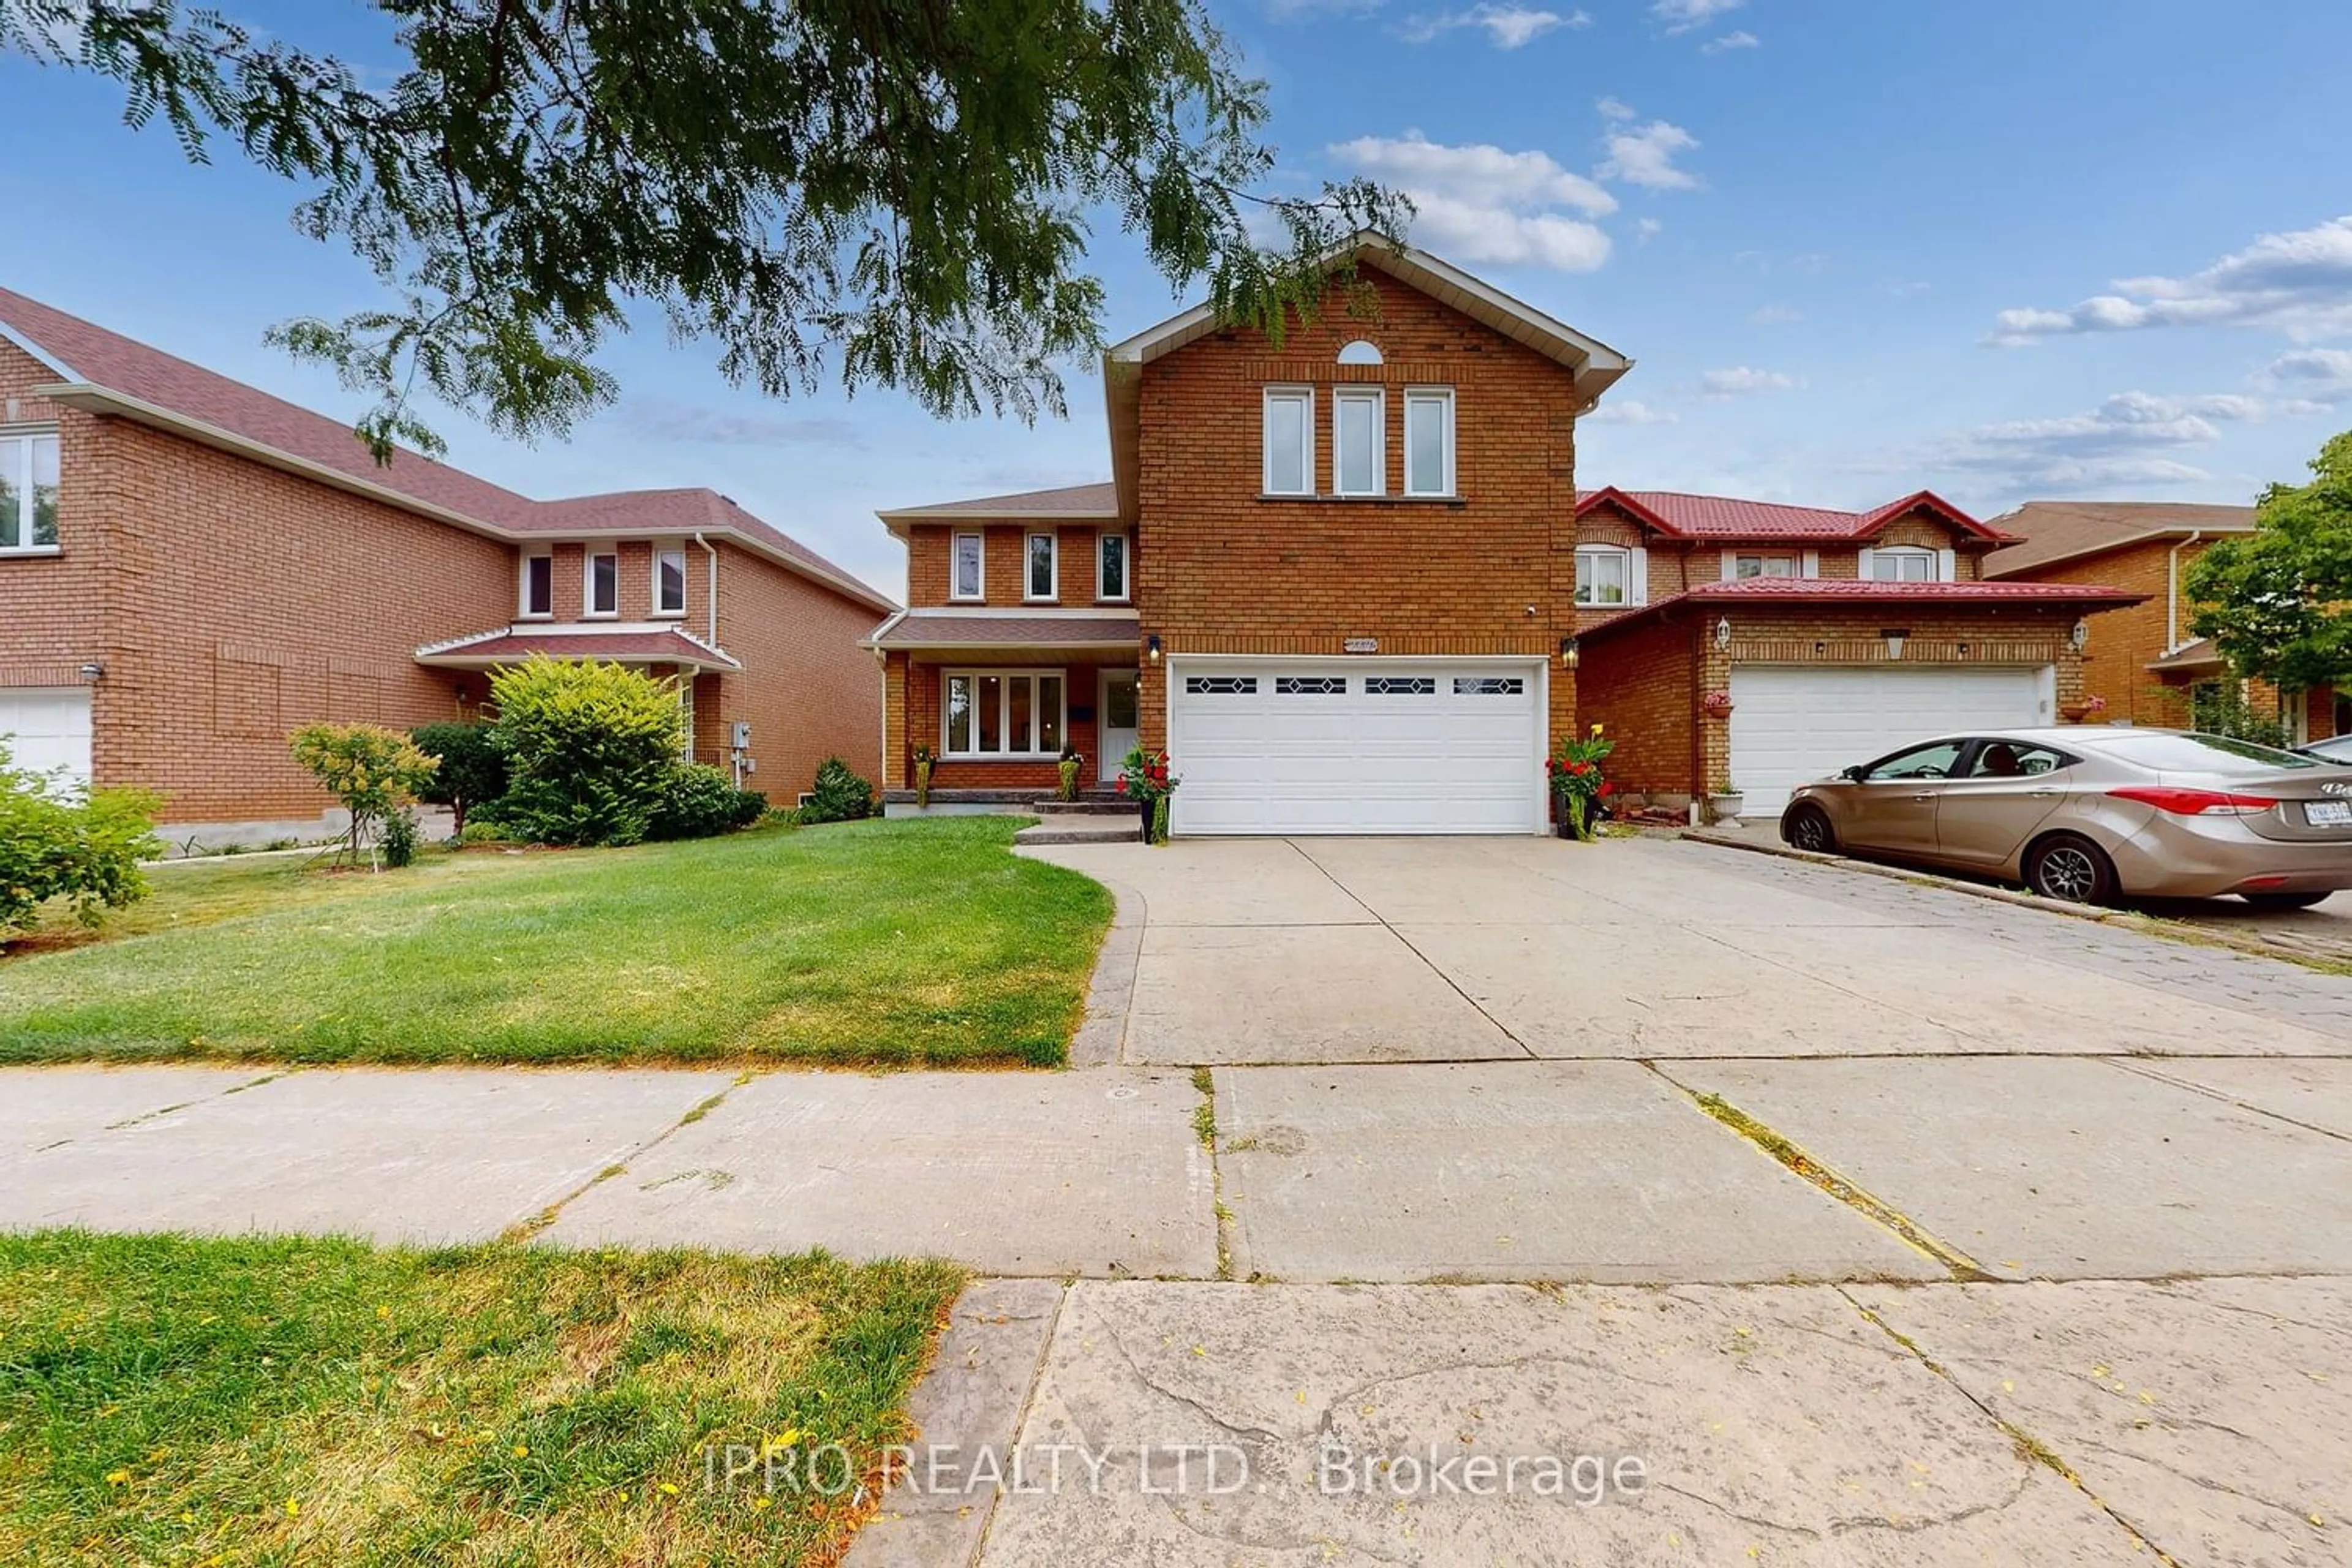 Home with brick exterior material for 2330 Credit Valley Rd, Mississauga Ontario L5M 4C9